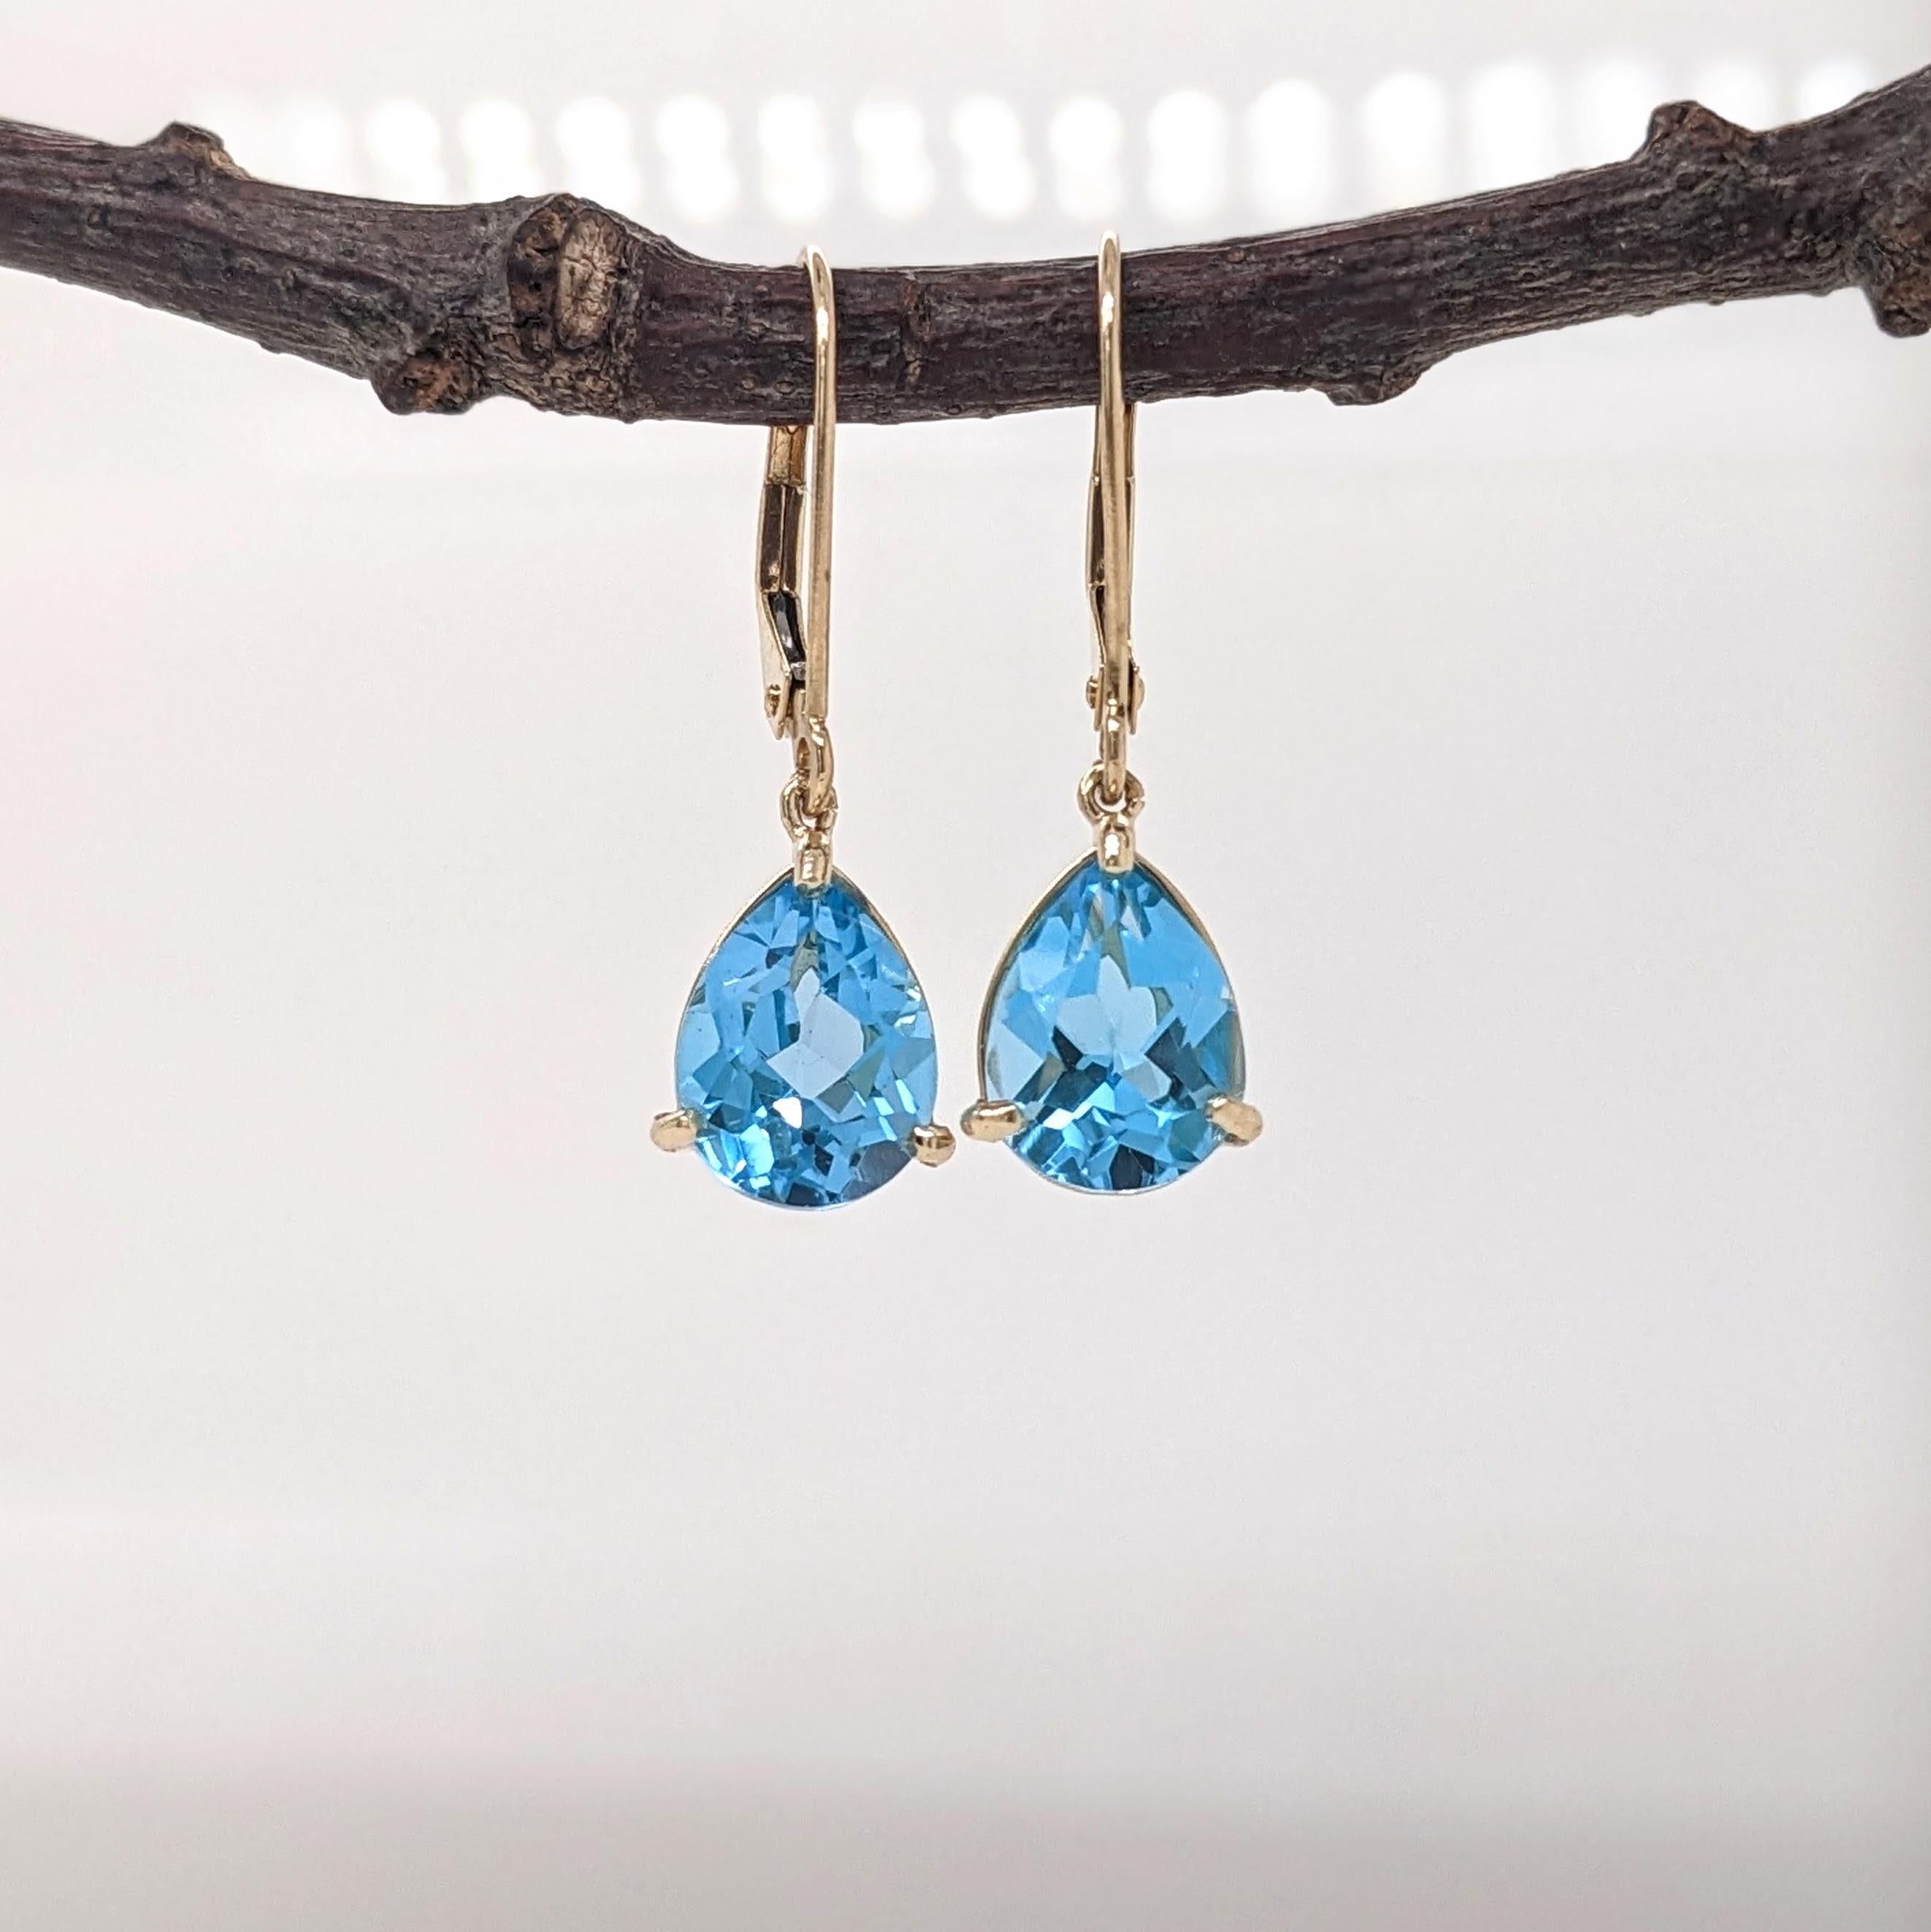 These dangle earrings feature a pair of 1.87 carat weight swiss topaz solitaire gemstones all set in 14k gold. These earrings can be a beautiful november birthstone gift for your loved ones! 

Specifications

Item Type: Earrings
Center Stone: Swiss